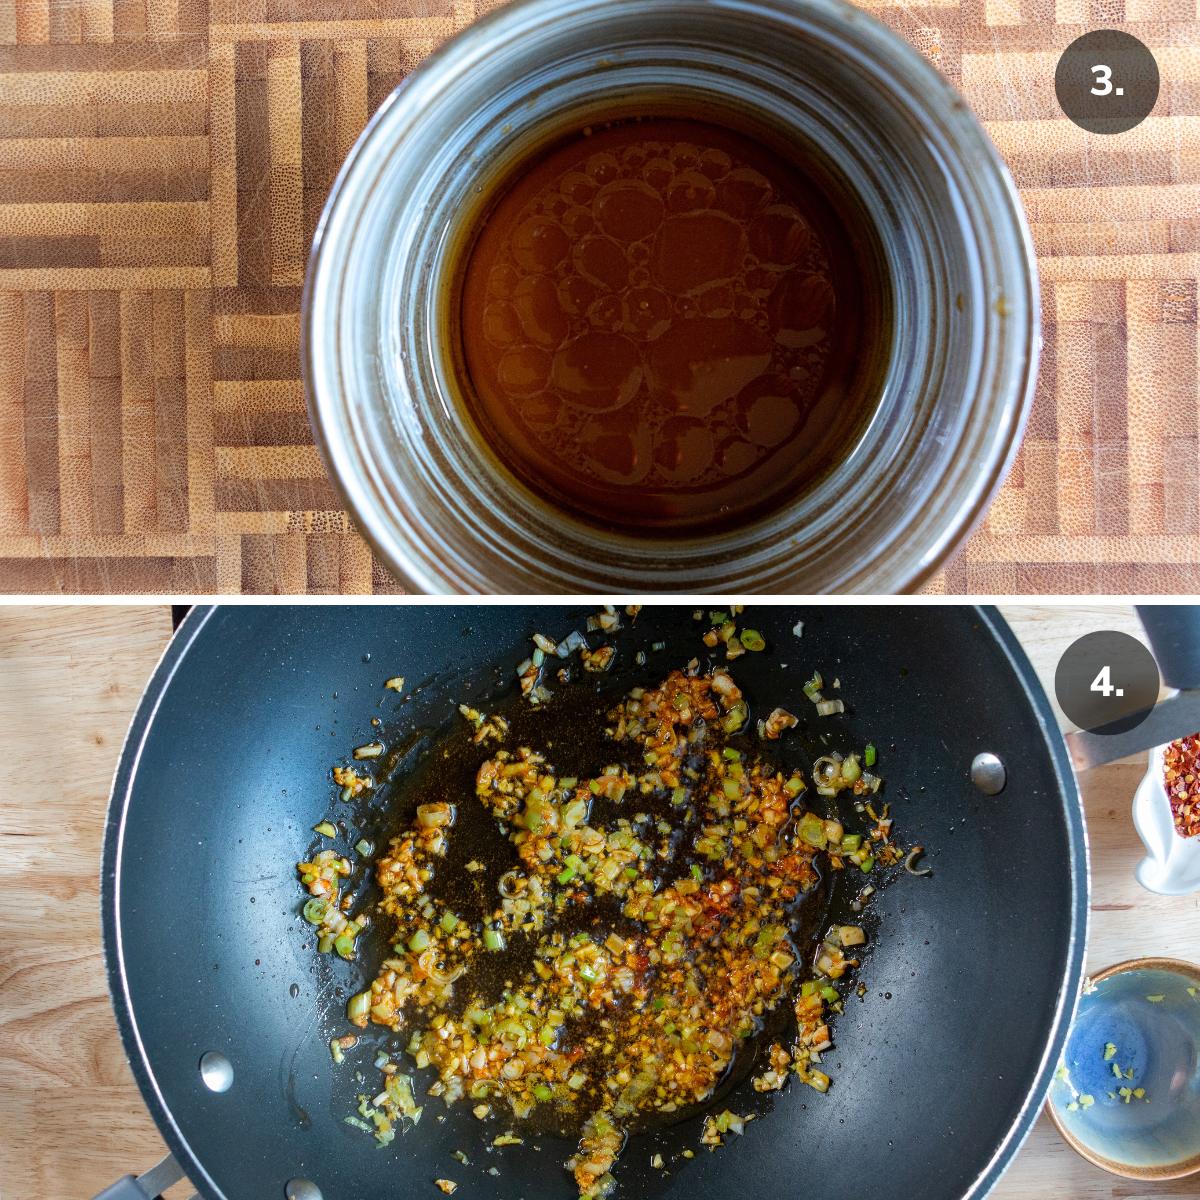 Stir fry sauce in a brown bowl and aromatics frying in wok.